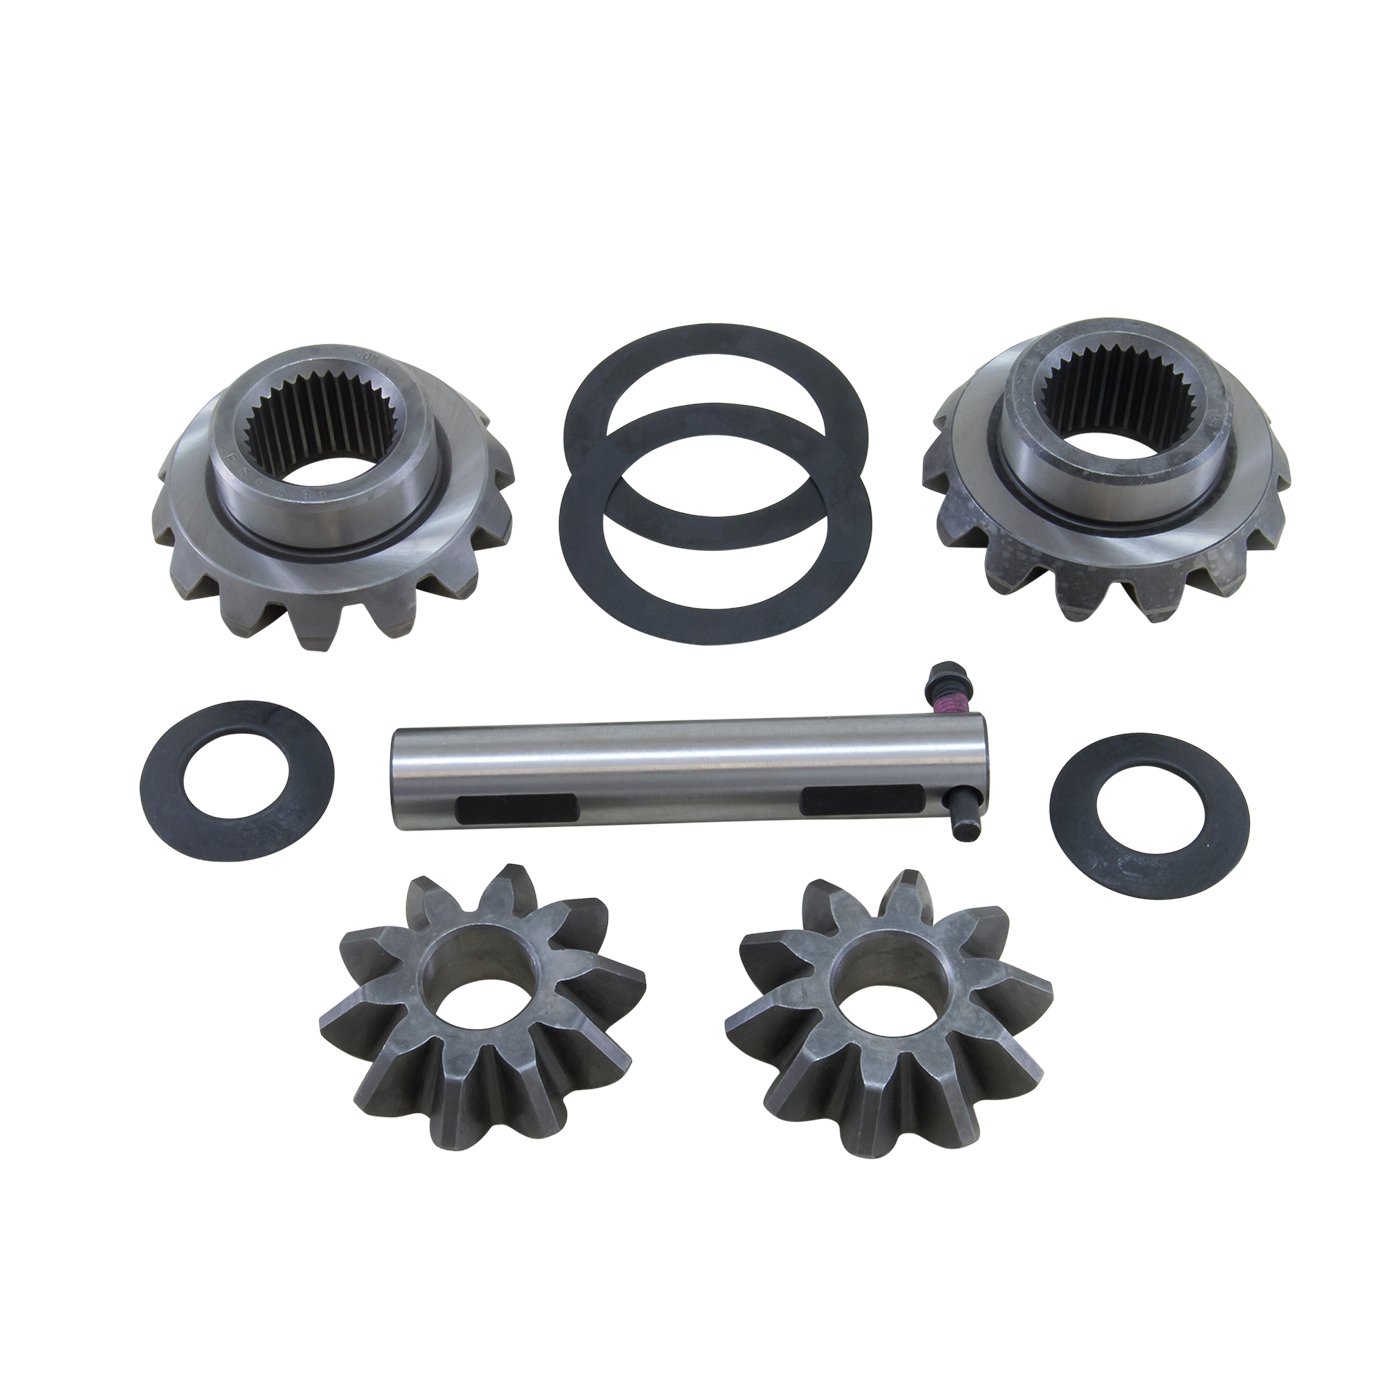 Standard Open Spider Gear Kit Ford 8.8" Open Differential